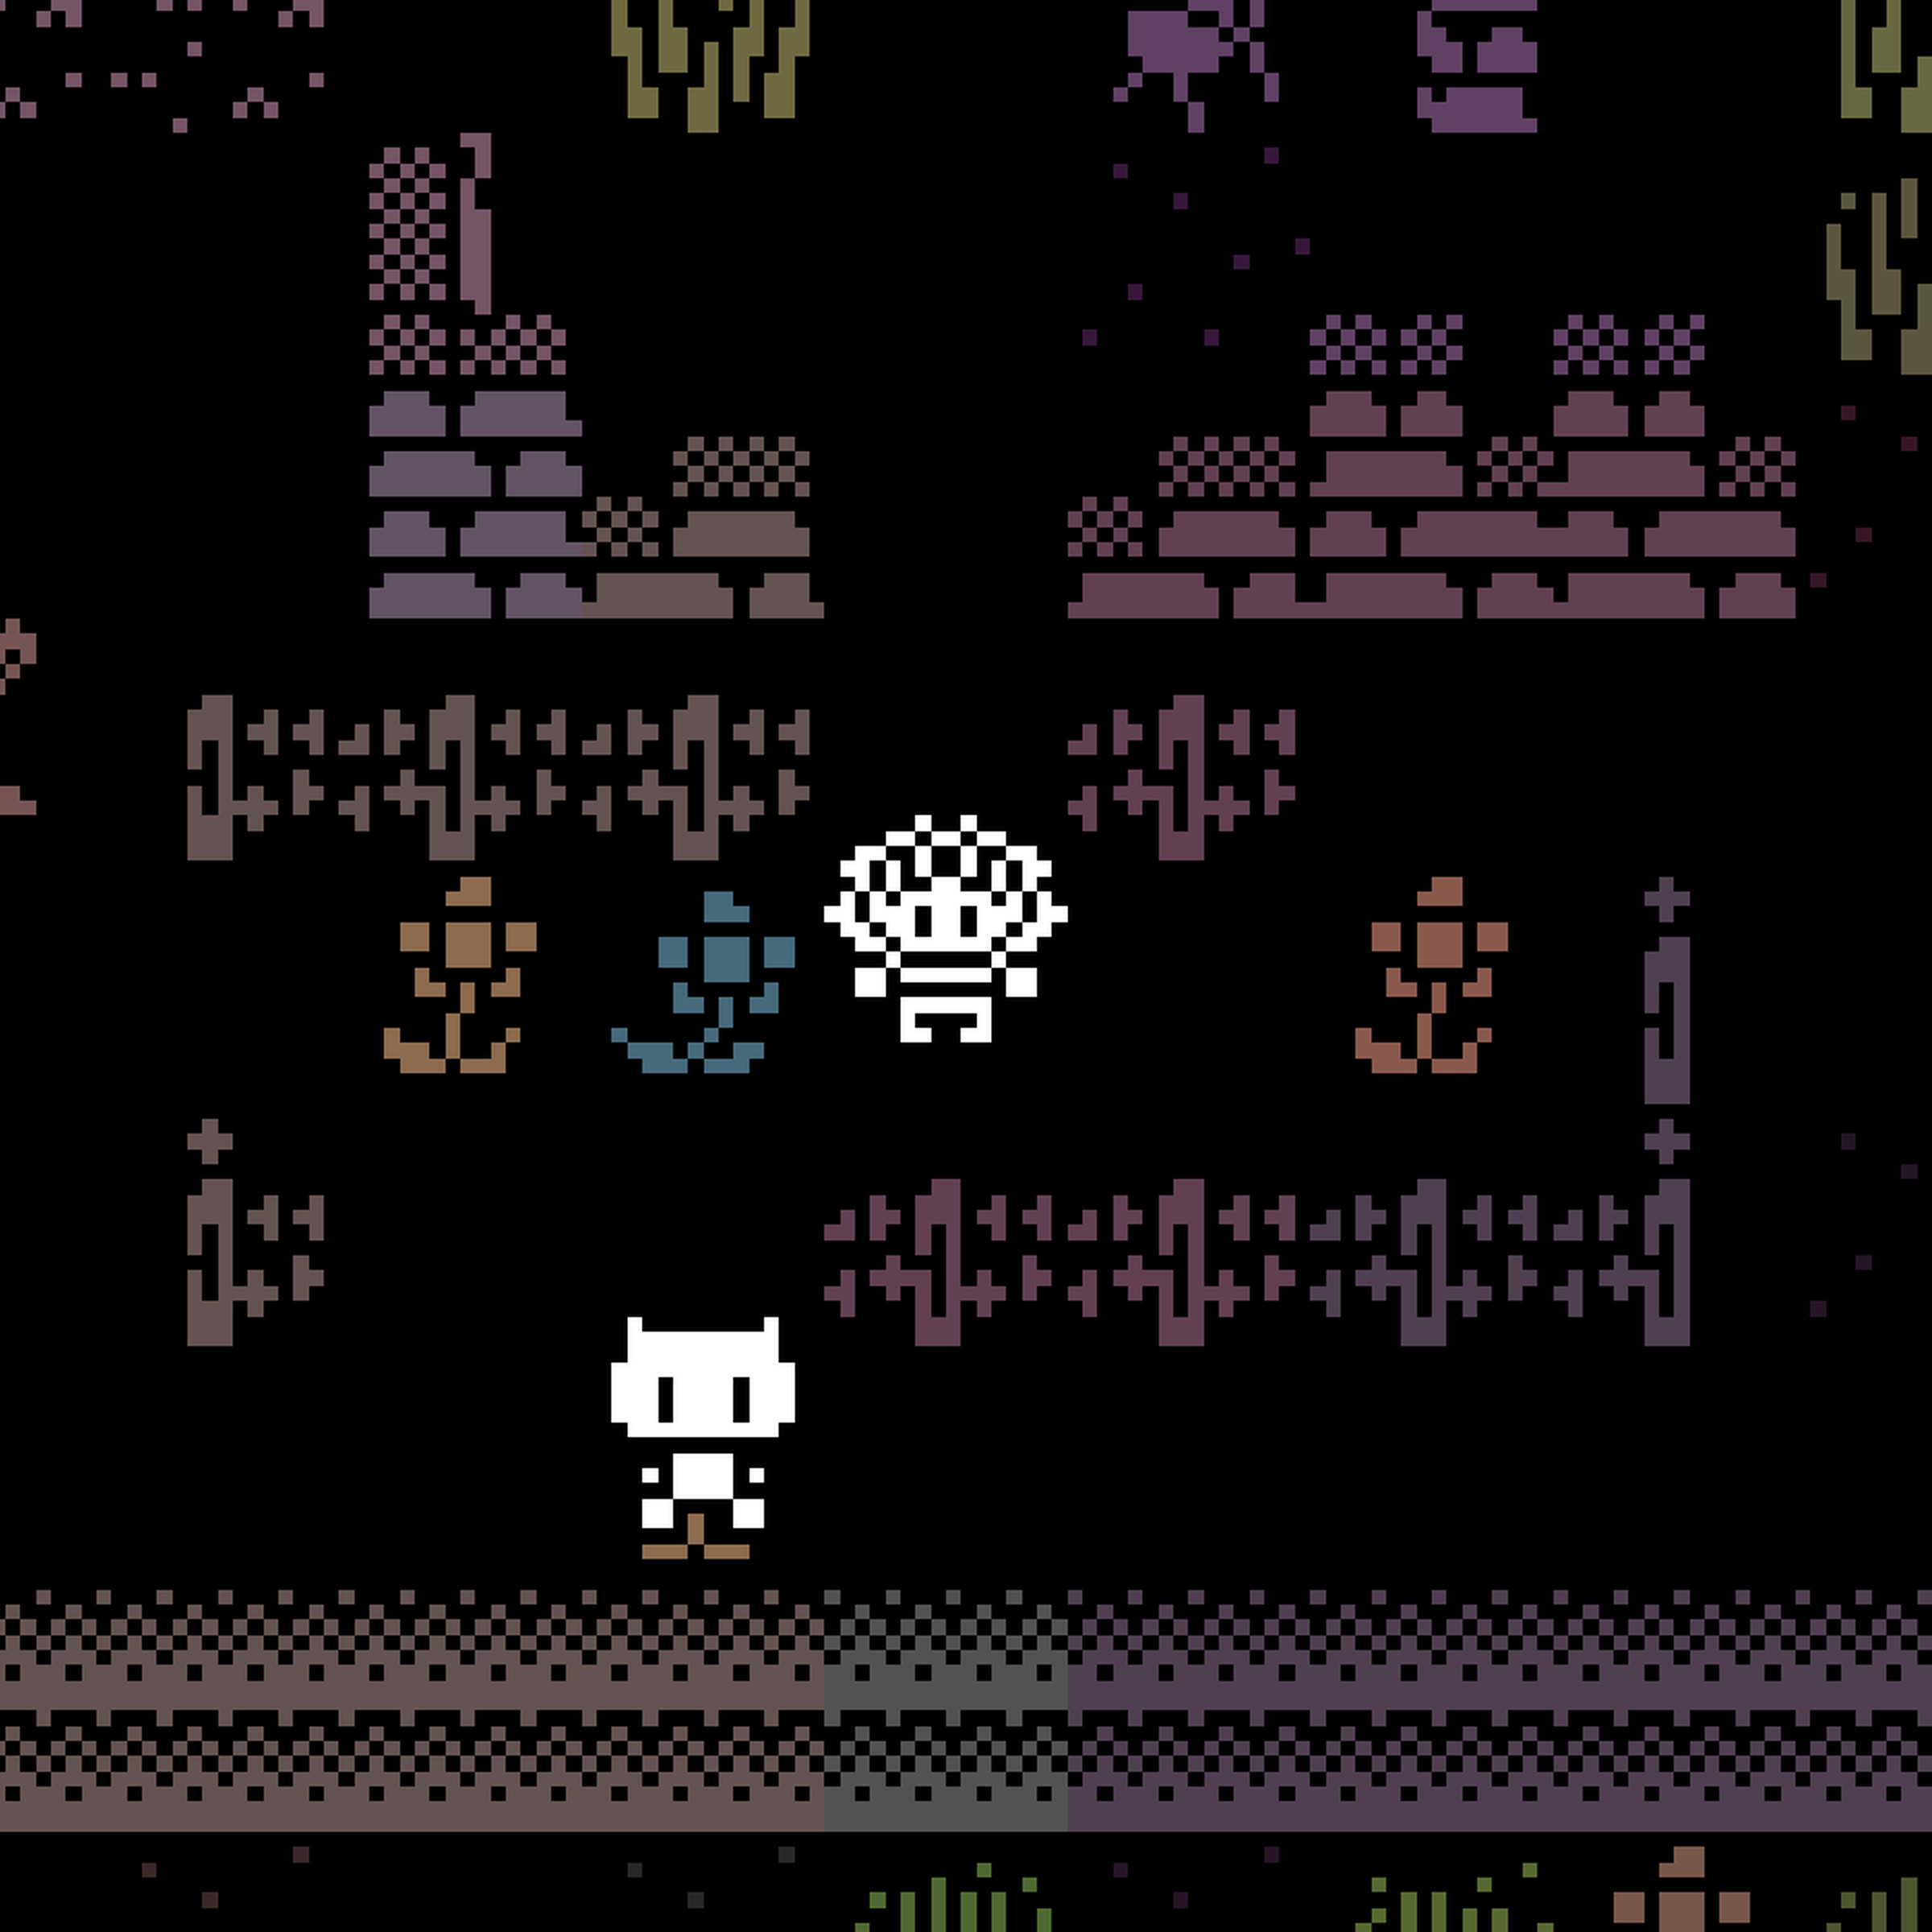 Screenshot from Familiars, a game by Nigel Nelson